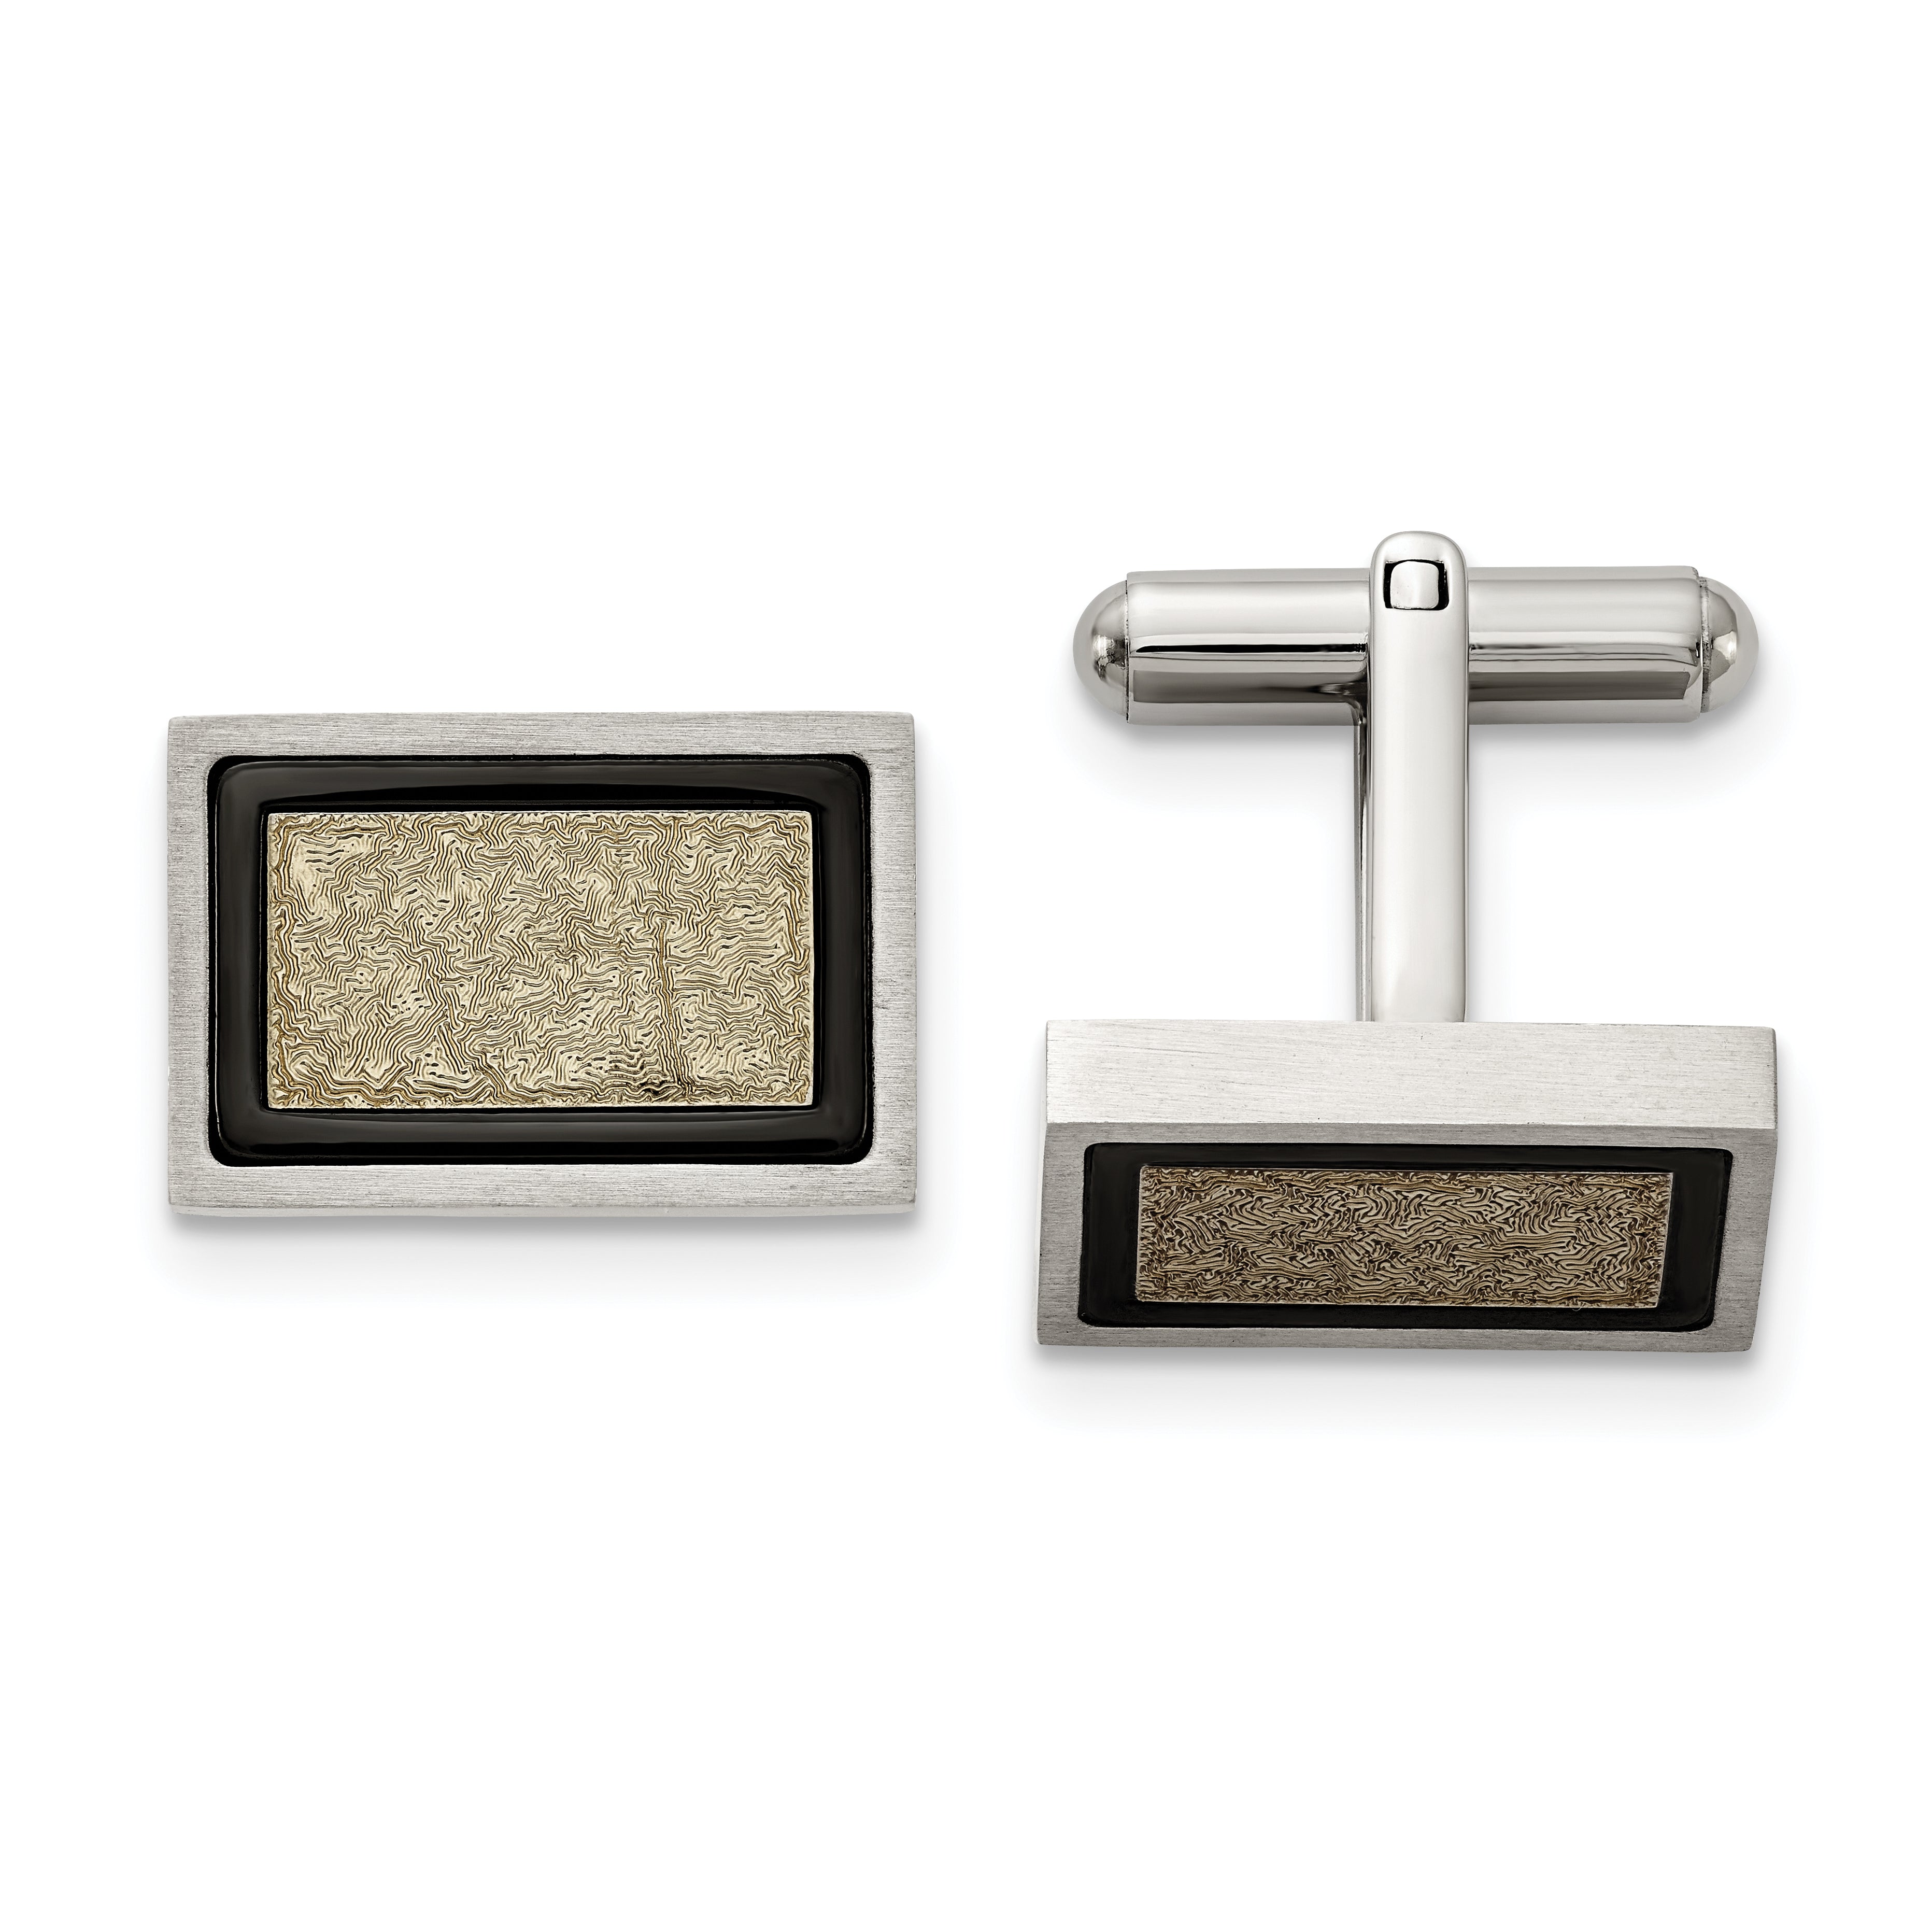 Chisel Stainless Steel Brushed and Textured Black and Yellow IP-plated Cufflinks